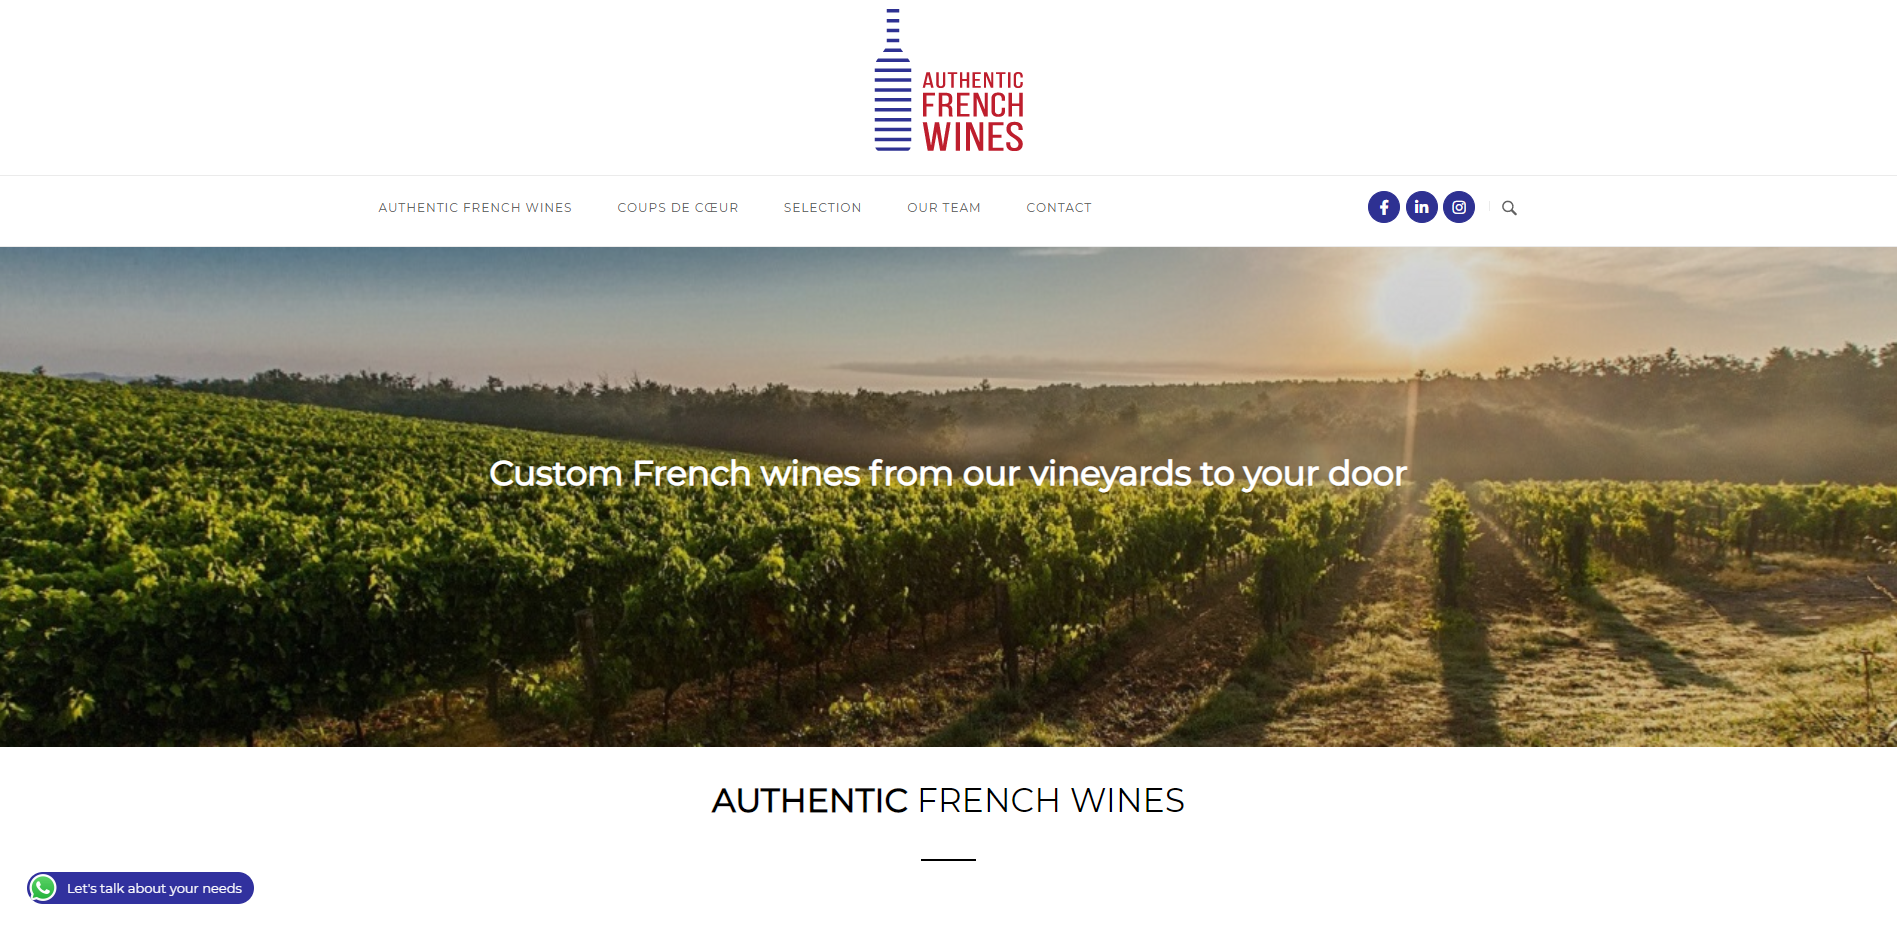 Authentic French Wines Adwines - Création site internet Geoffrey Leduc